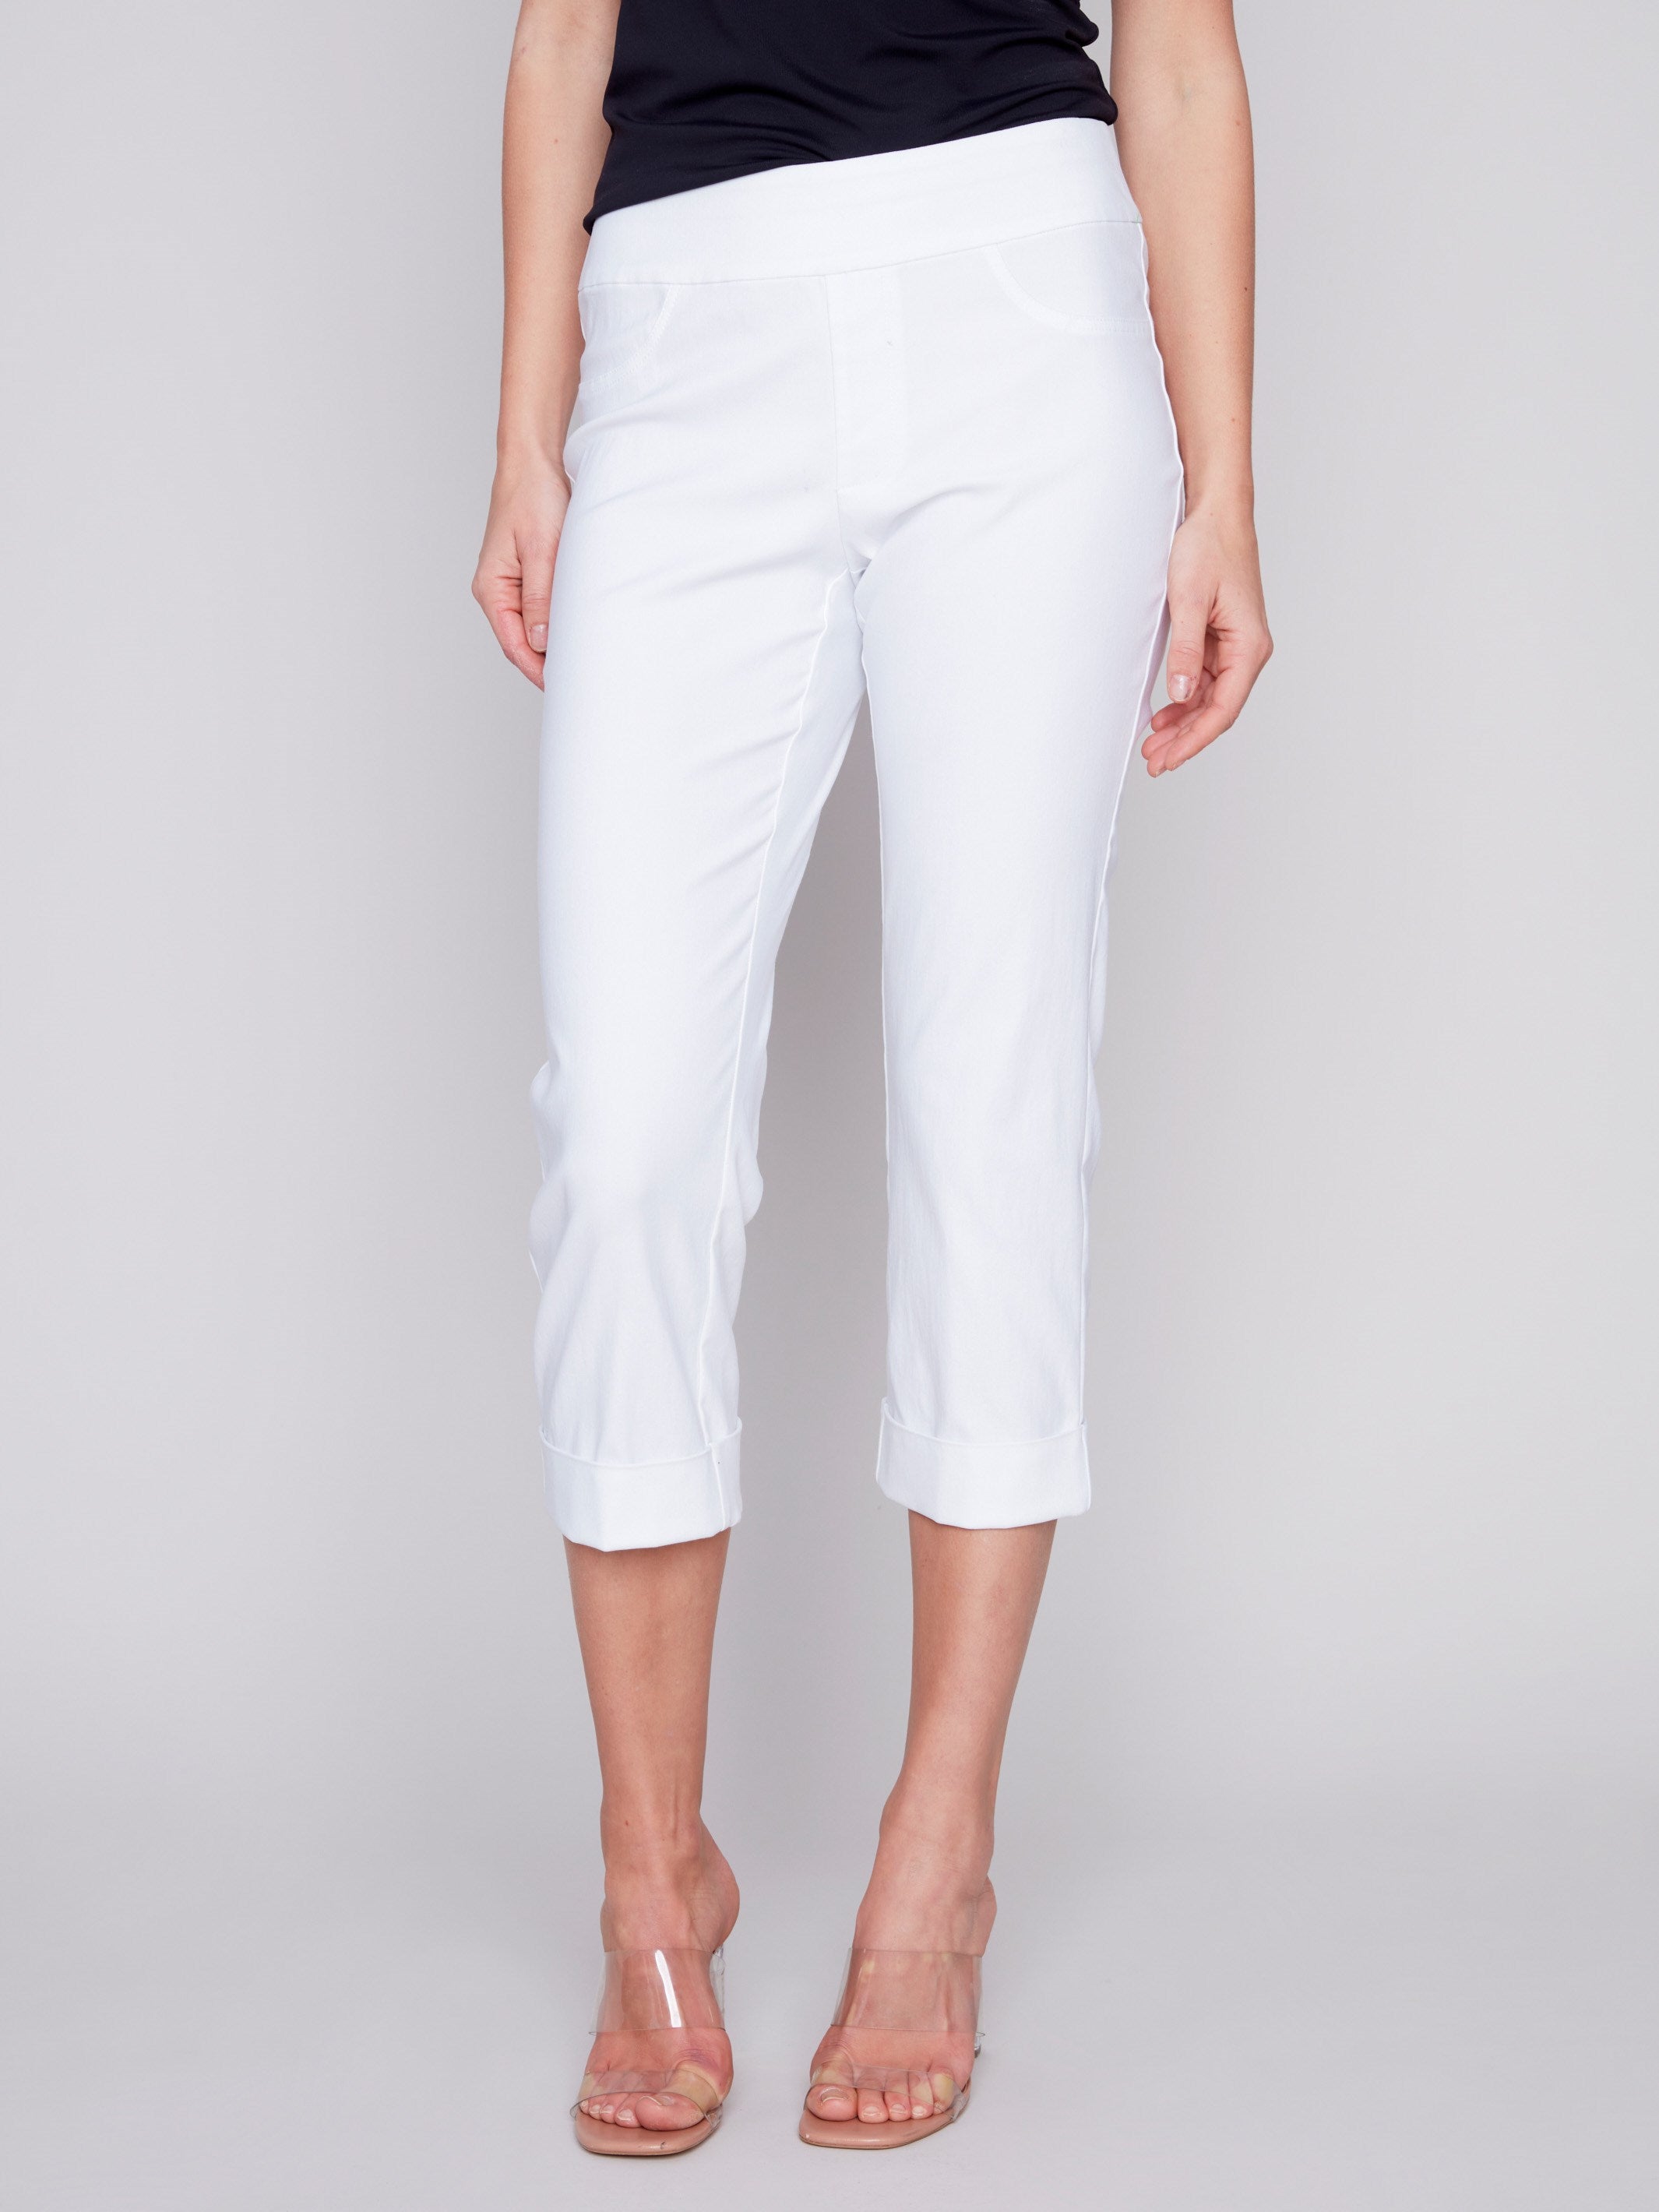 Buy Wemyc Nylon Women's Ankle Length Capri Pant Slip with Snip a Length -  Color White (XS) at Amazon.in